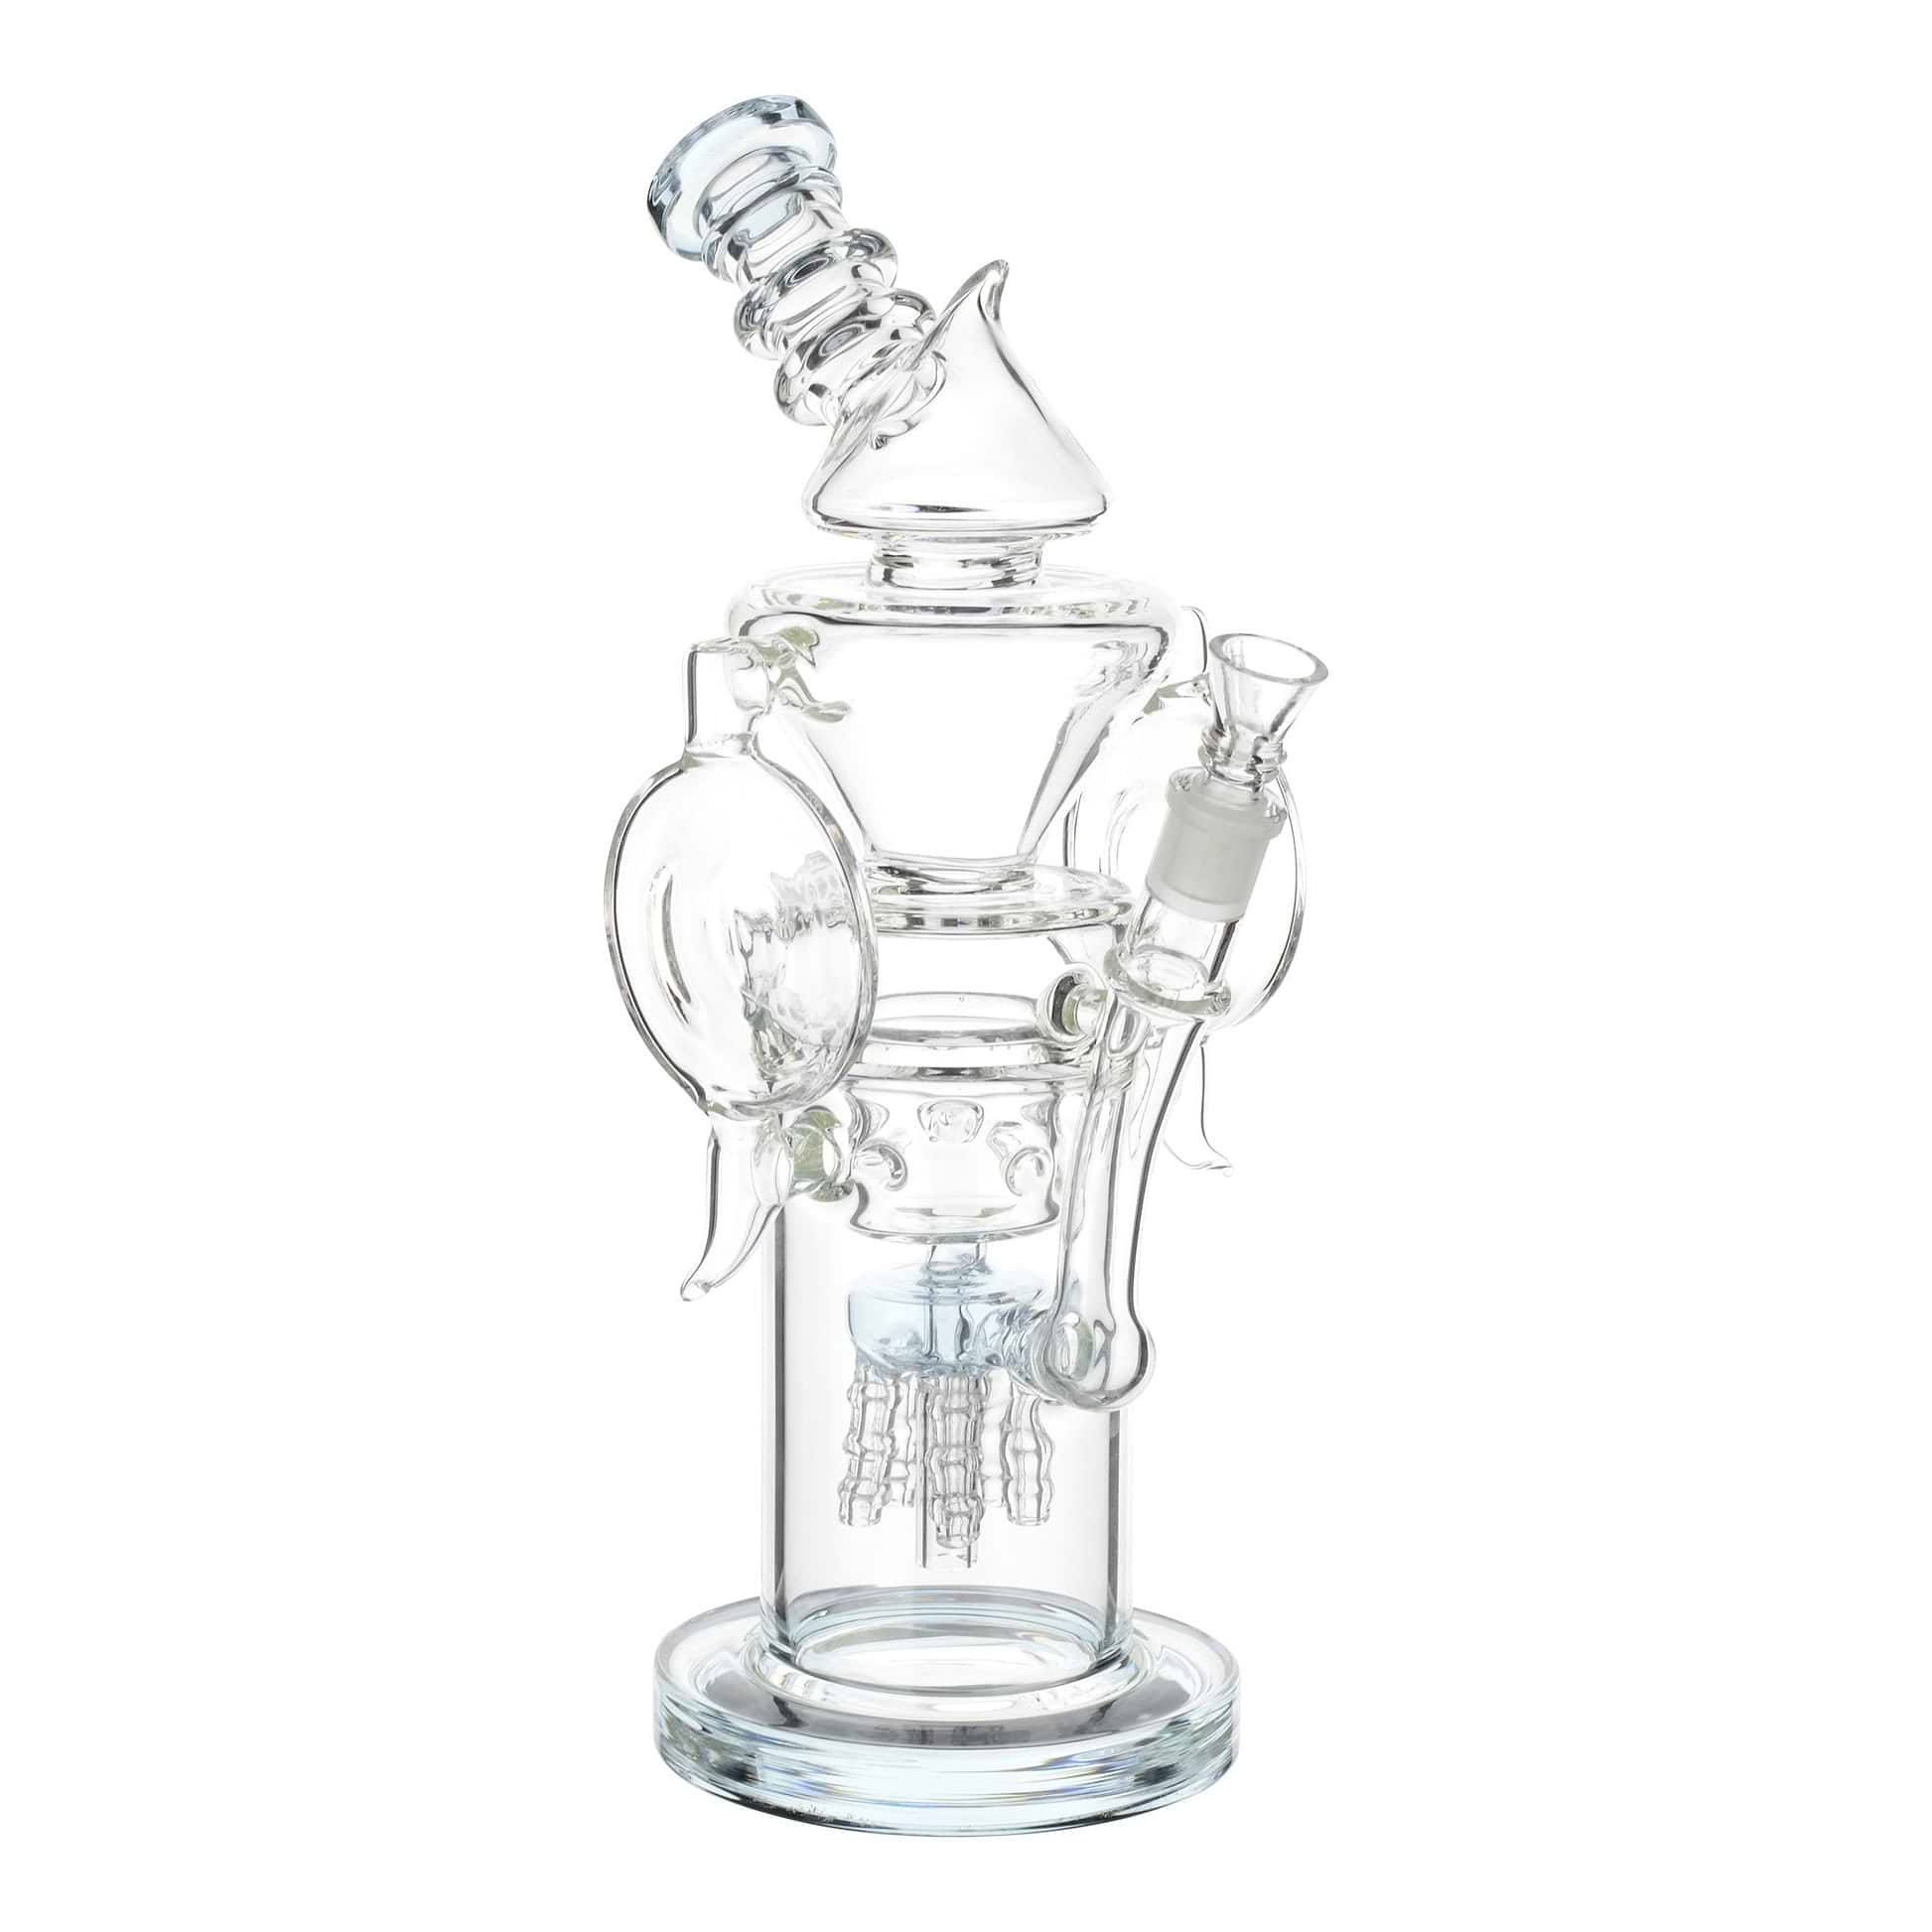 Full shot of crystal clear 13 inch glass bong with light teal perc mouthpiece facing left slightly tilted backwards